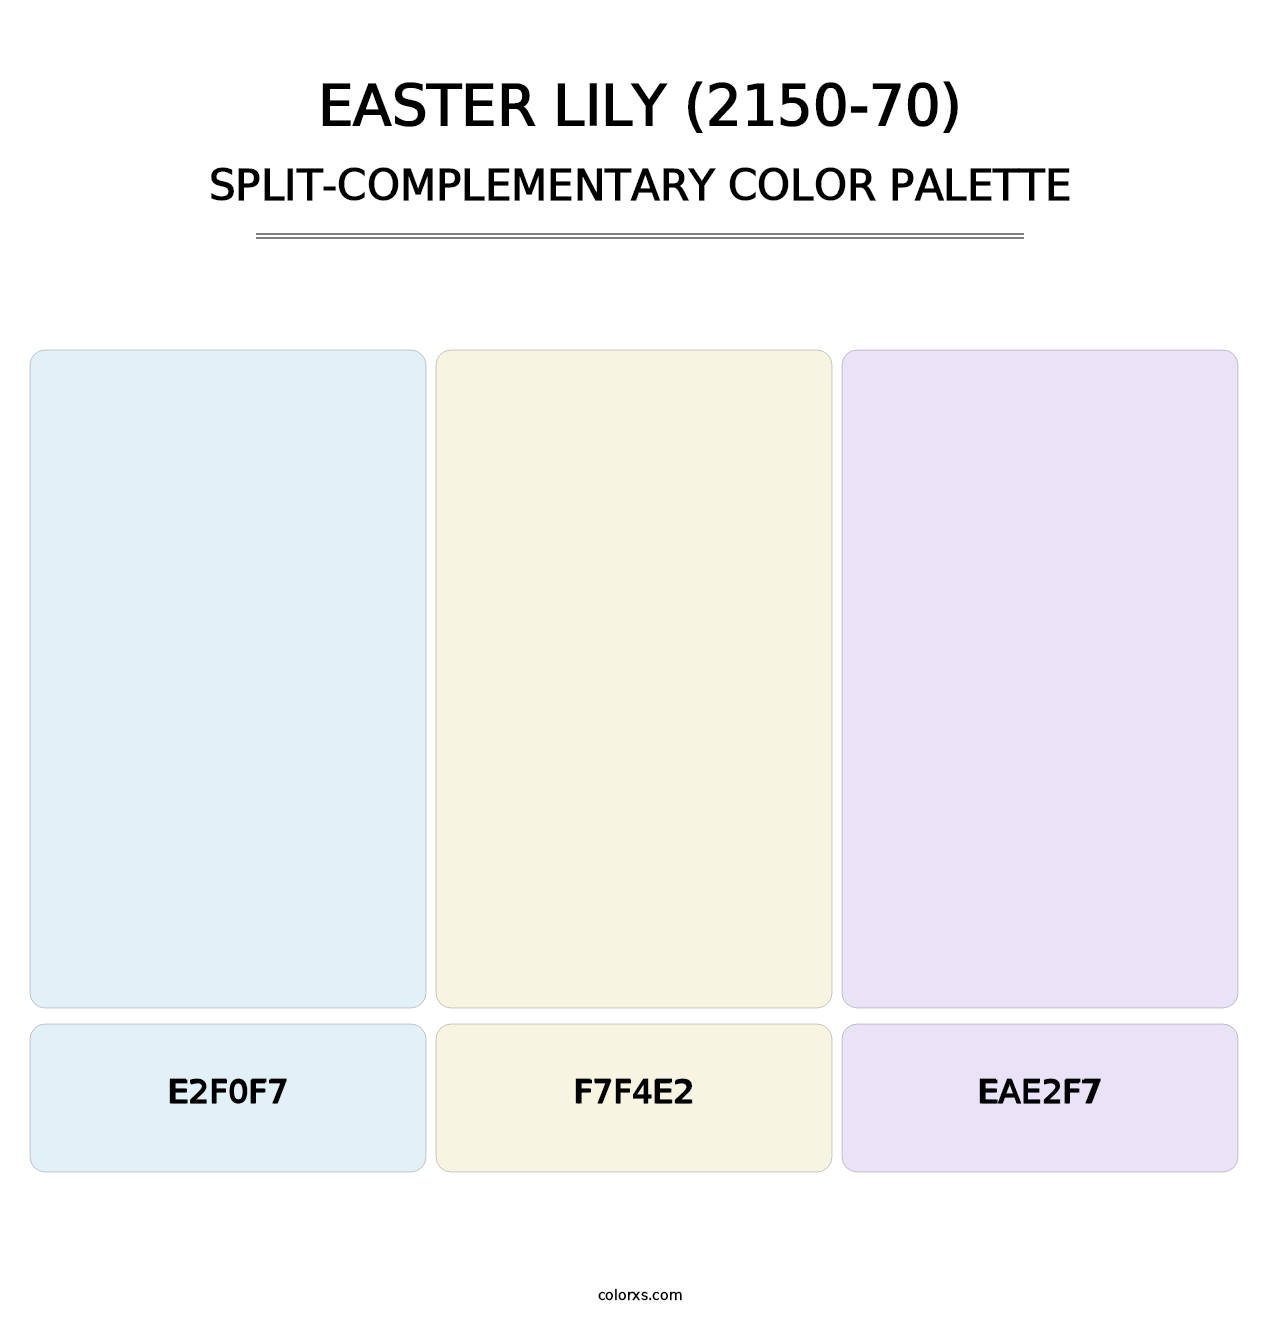 Easter Lily (2150-70) - Split-Complementary Color Palette